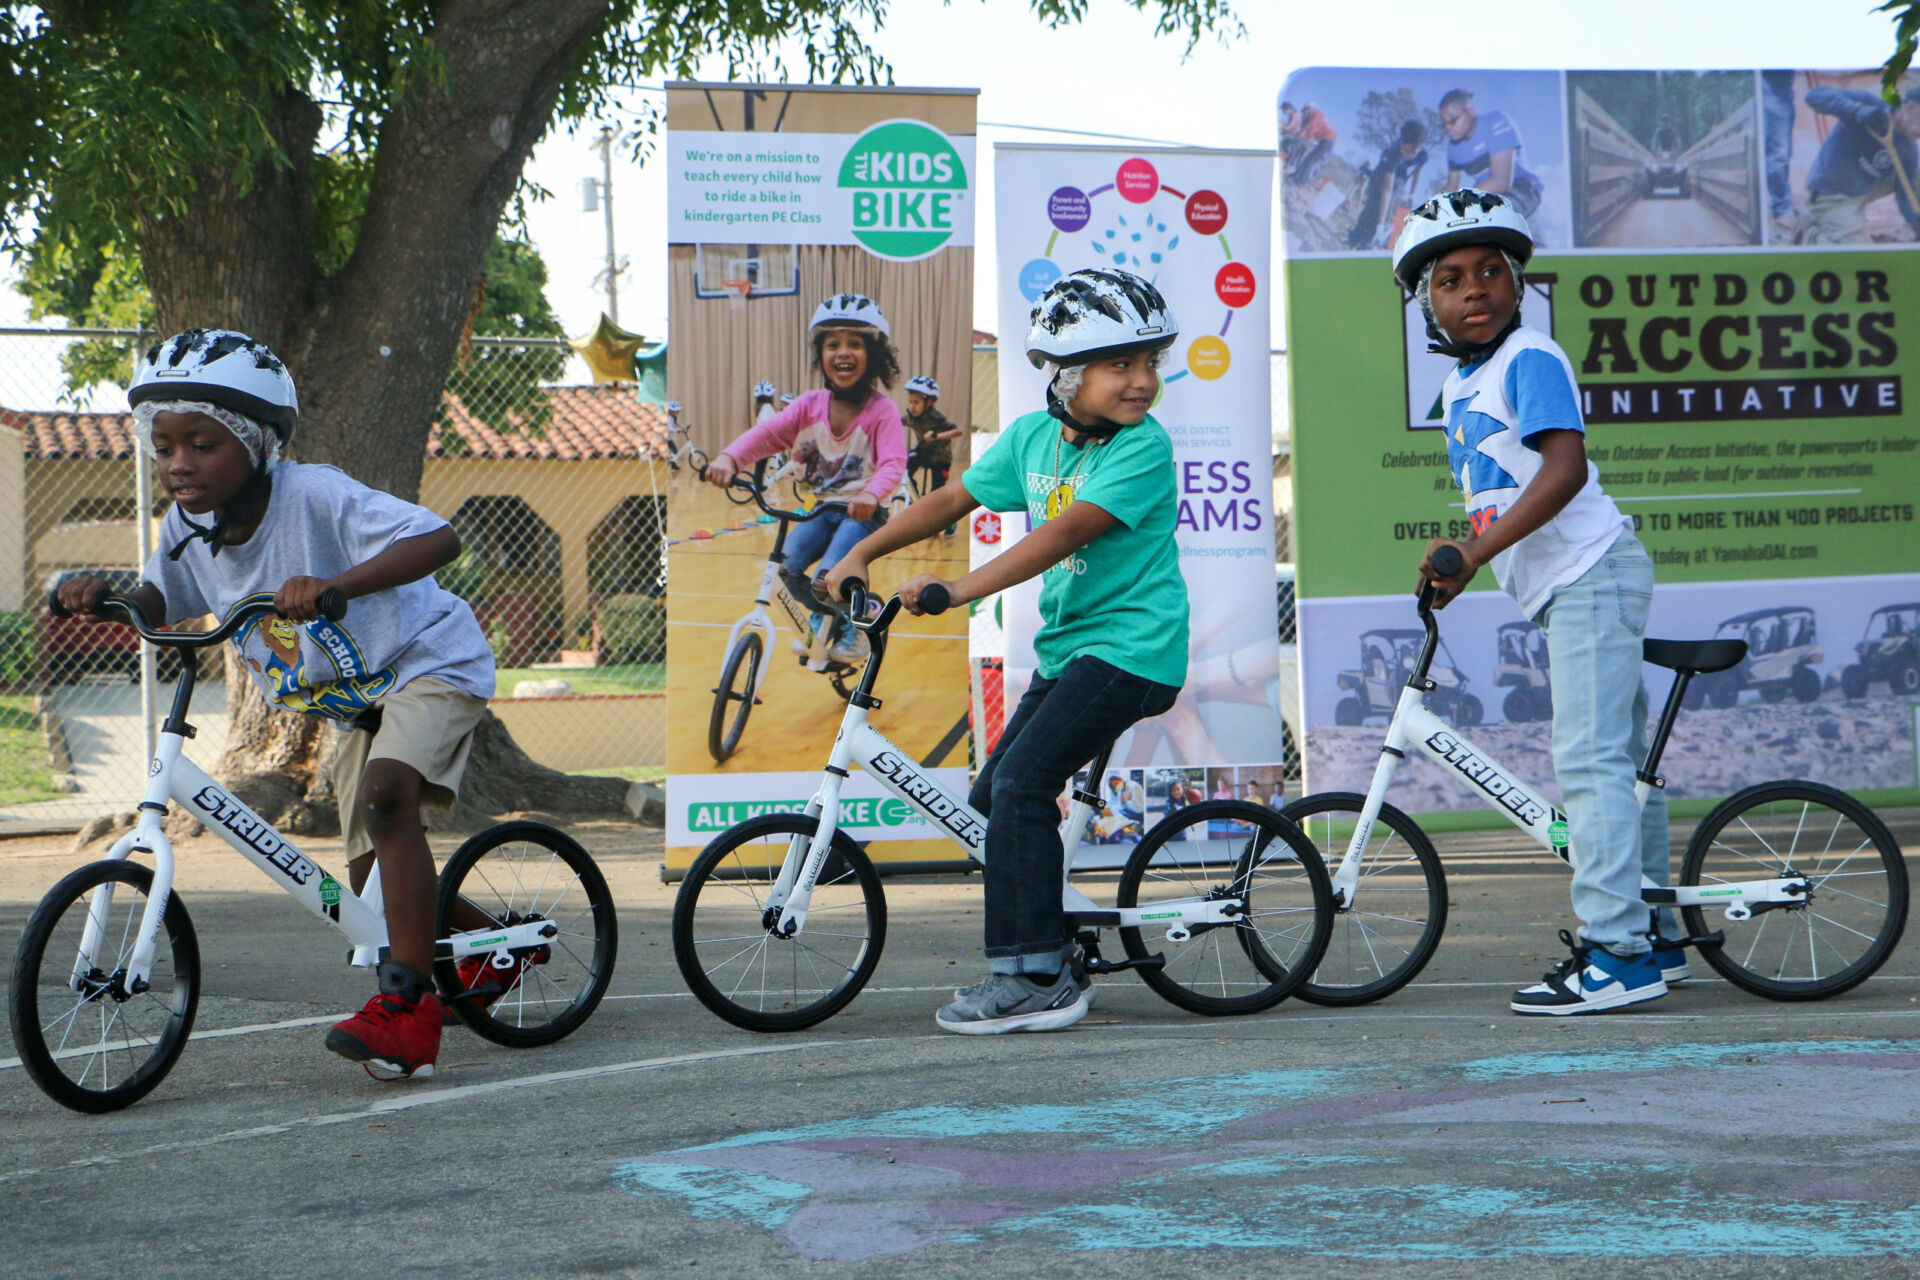 Children at the 74th Street Elementary School in the Los Angeles Unified School District (LAUSD) make use of bicycles from an All Kids Bike Kindergarten Learn-to-Ride PE education package made possible by a donation from the Yamaha Outdoor Access Initiative. Photo courtesy Yamaha Motor Corp., USA.